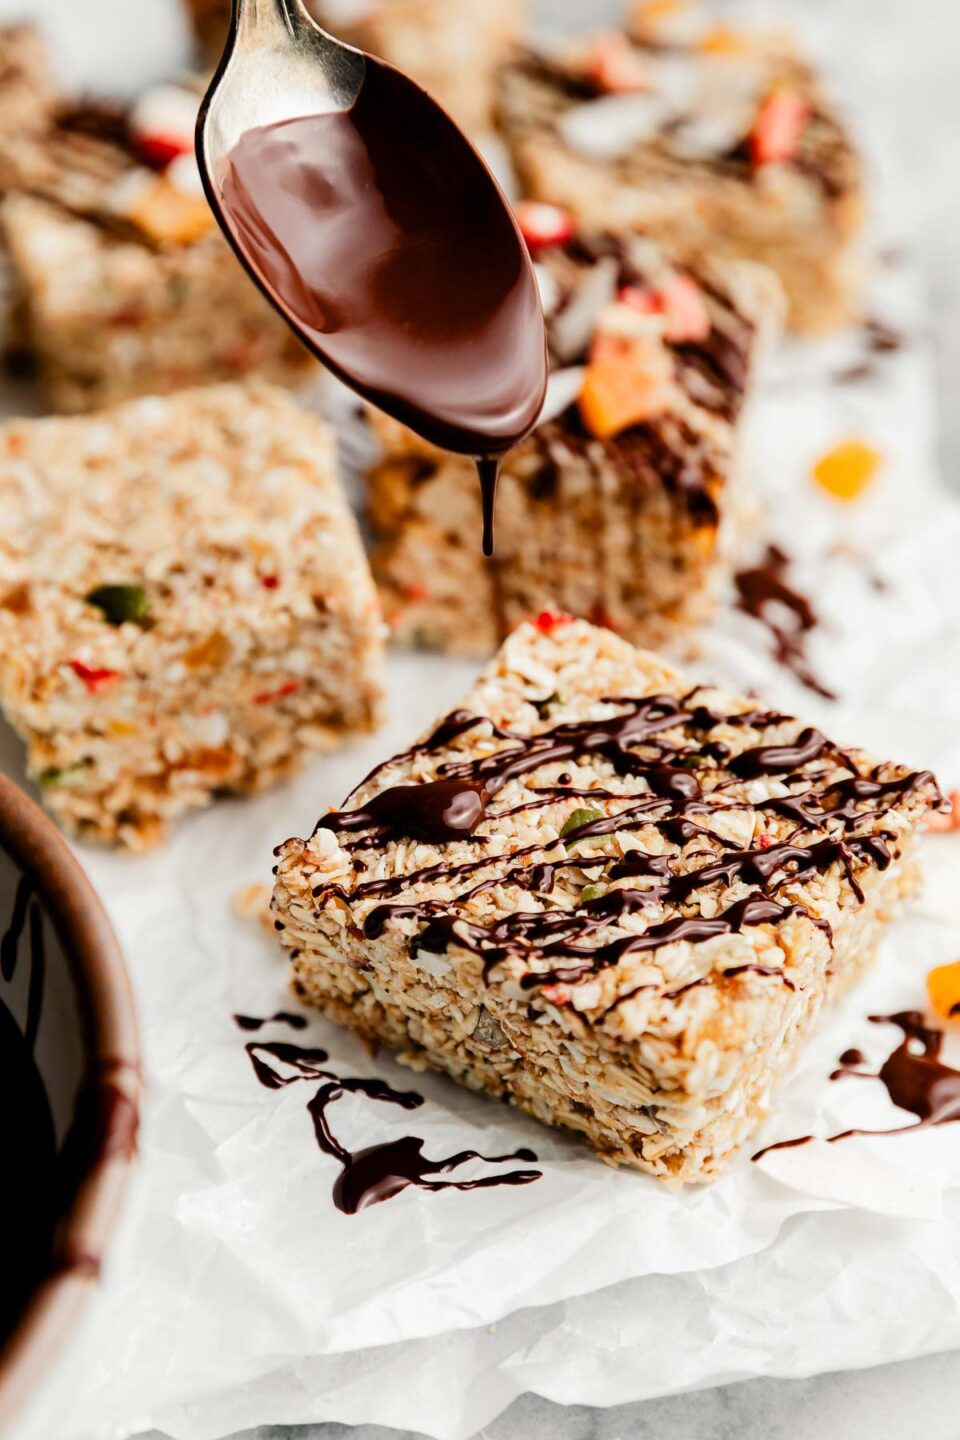 A side shot of a sliced muesli bar on parchment paper being drizzled with chocolate sauce from a spoon. Chocolate drizzled and plain muesli bars sit in the background.